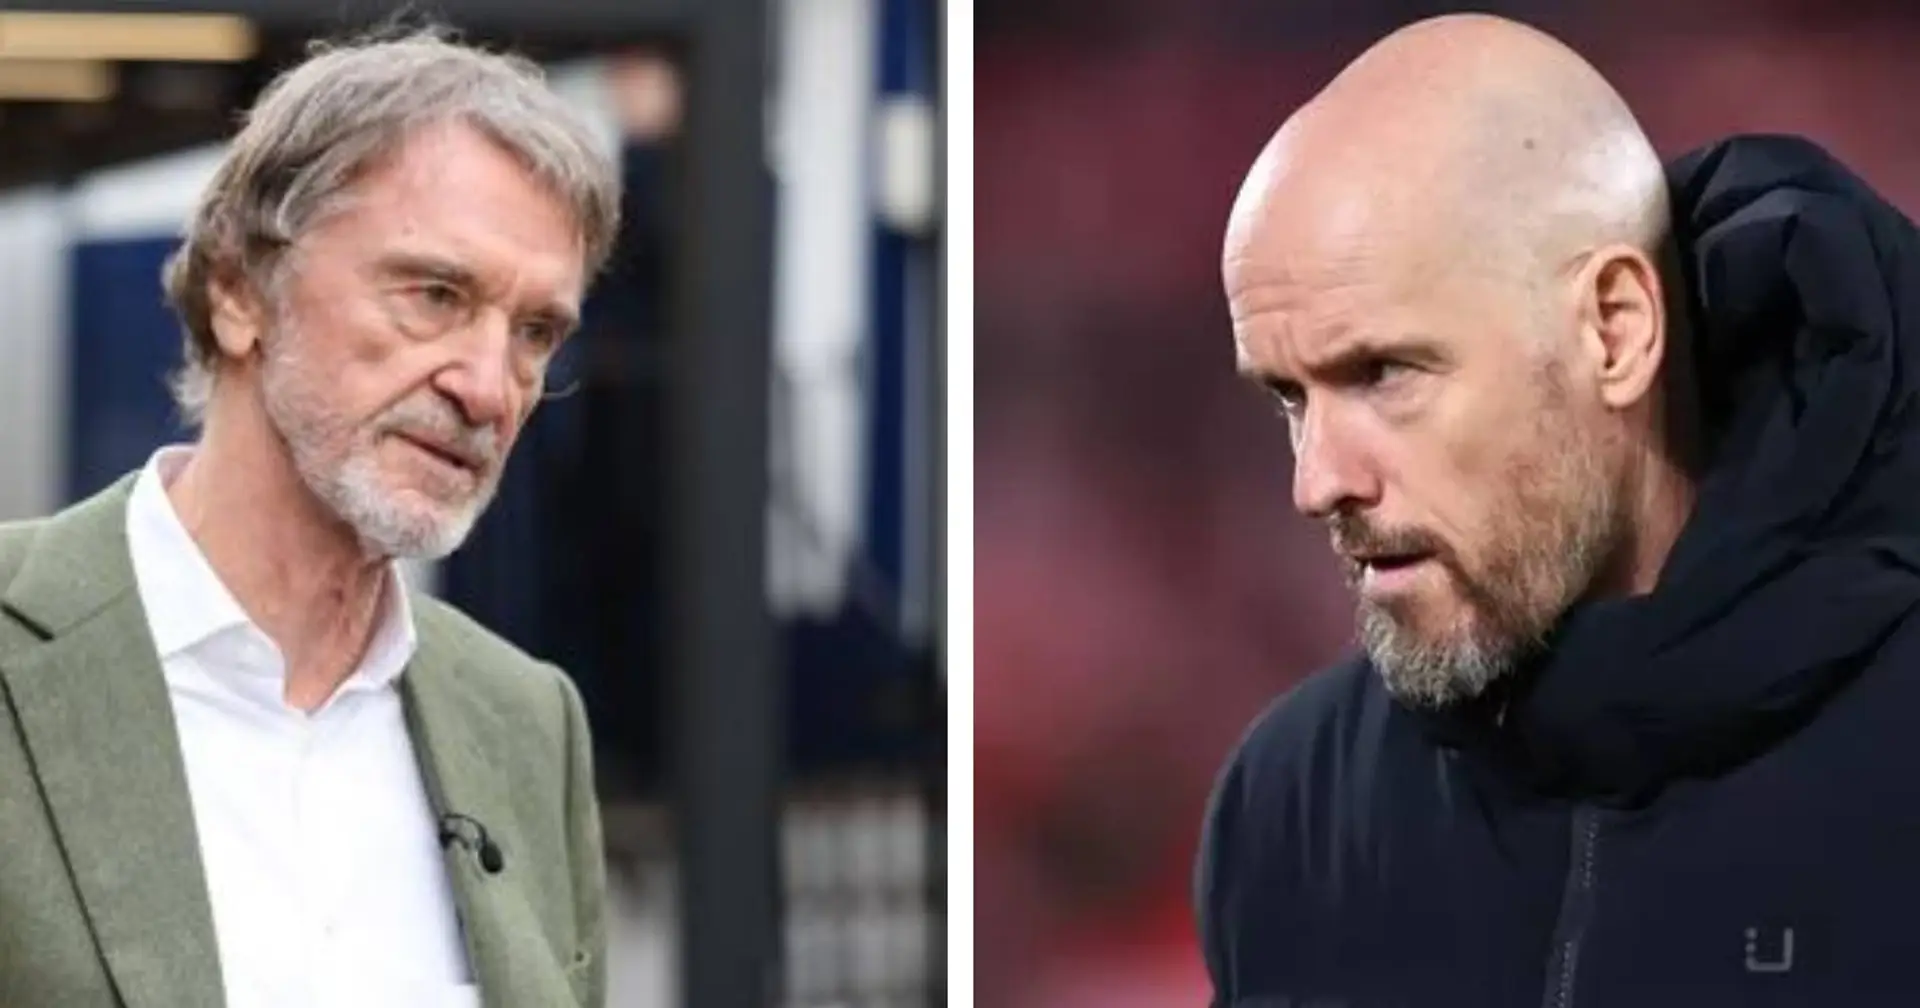 Ratcliffe wants to dilute manager's role at Man United, 'with or without Ten Hag' 